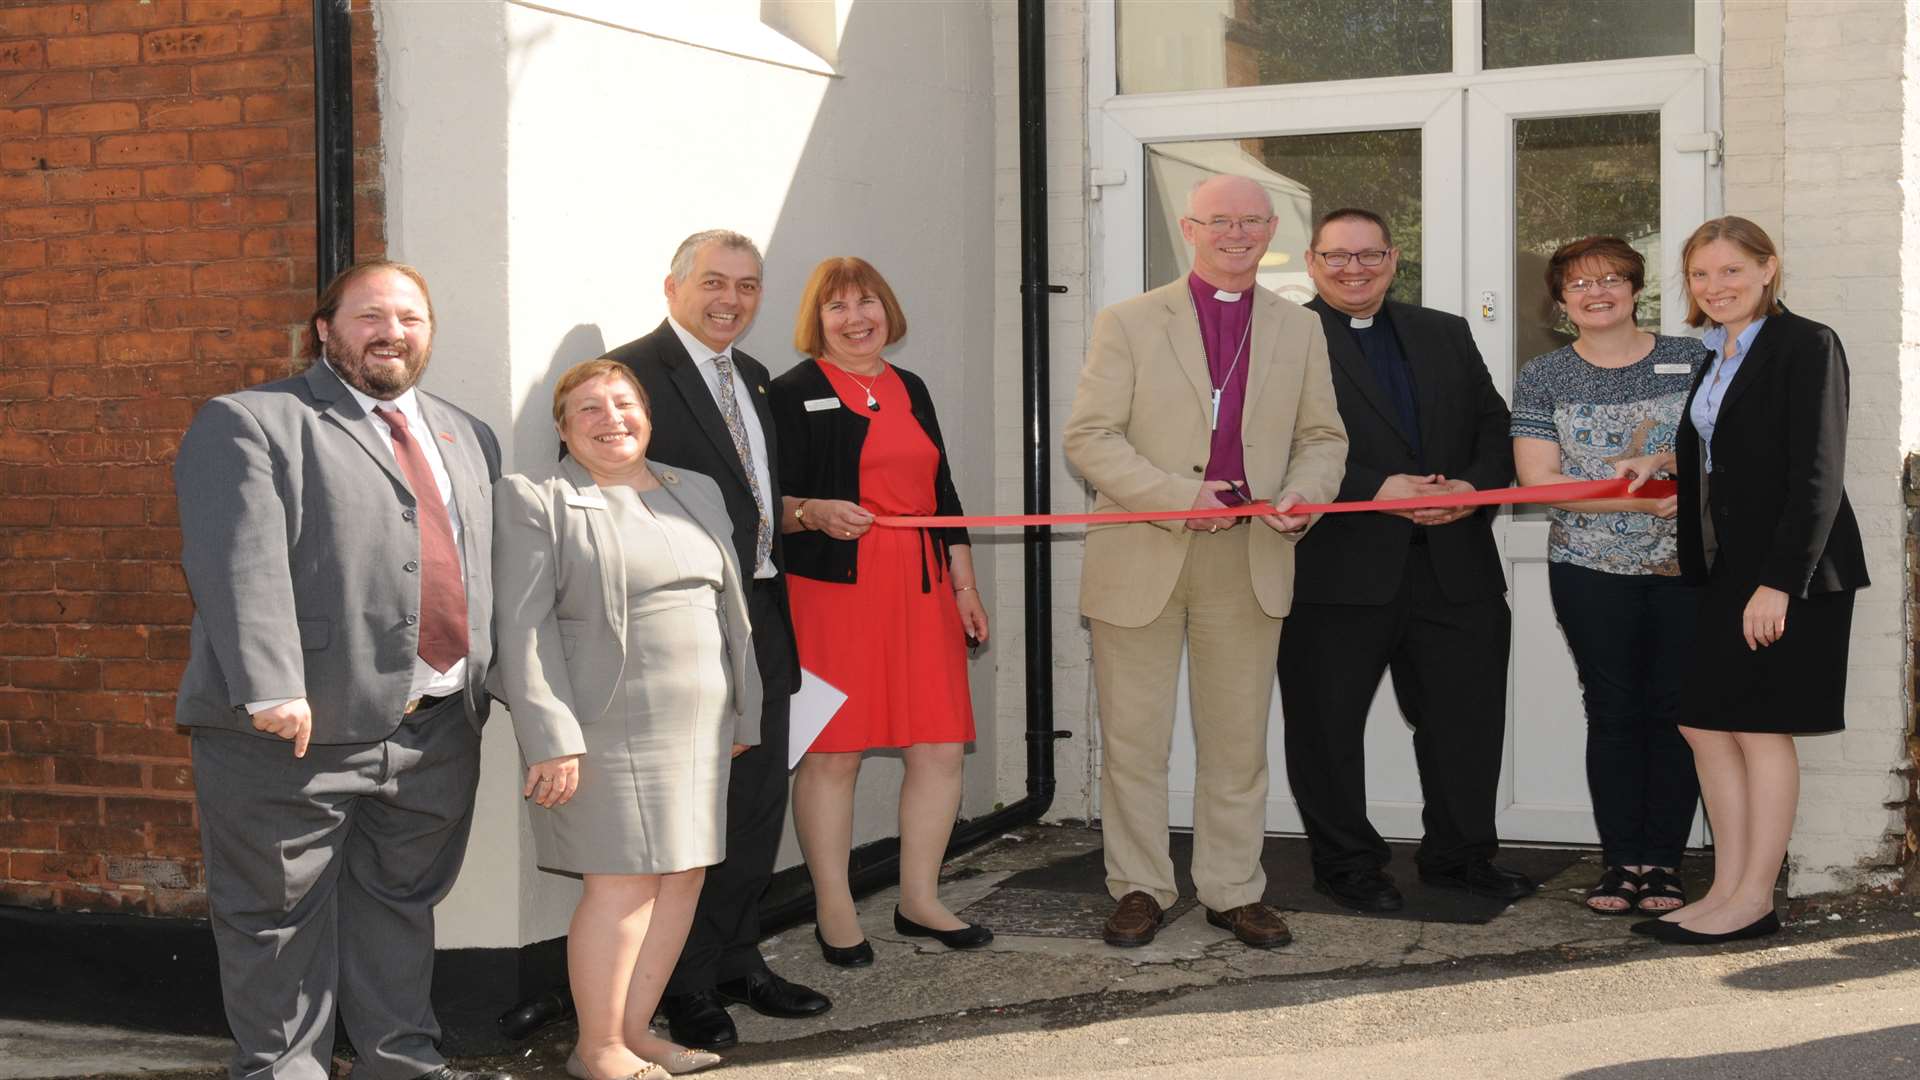 The Bishop of Rochester opens the centre